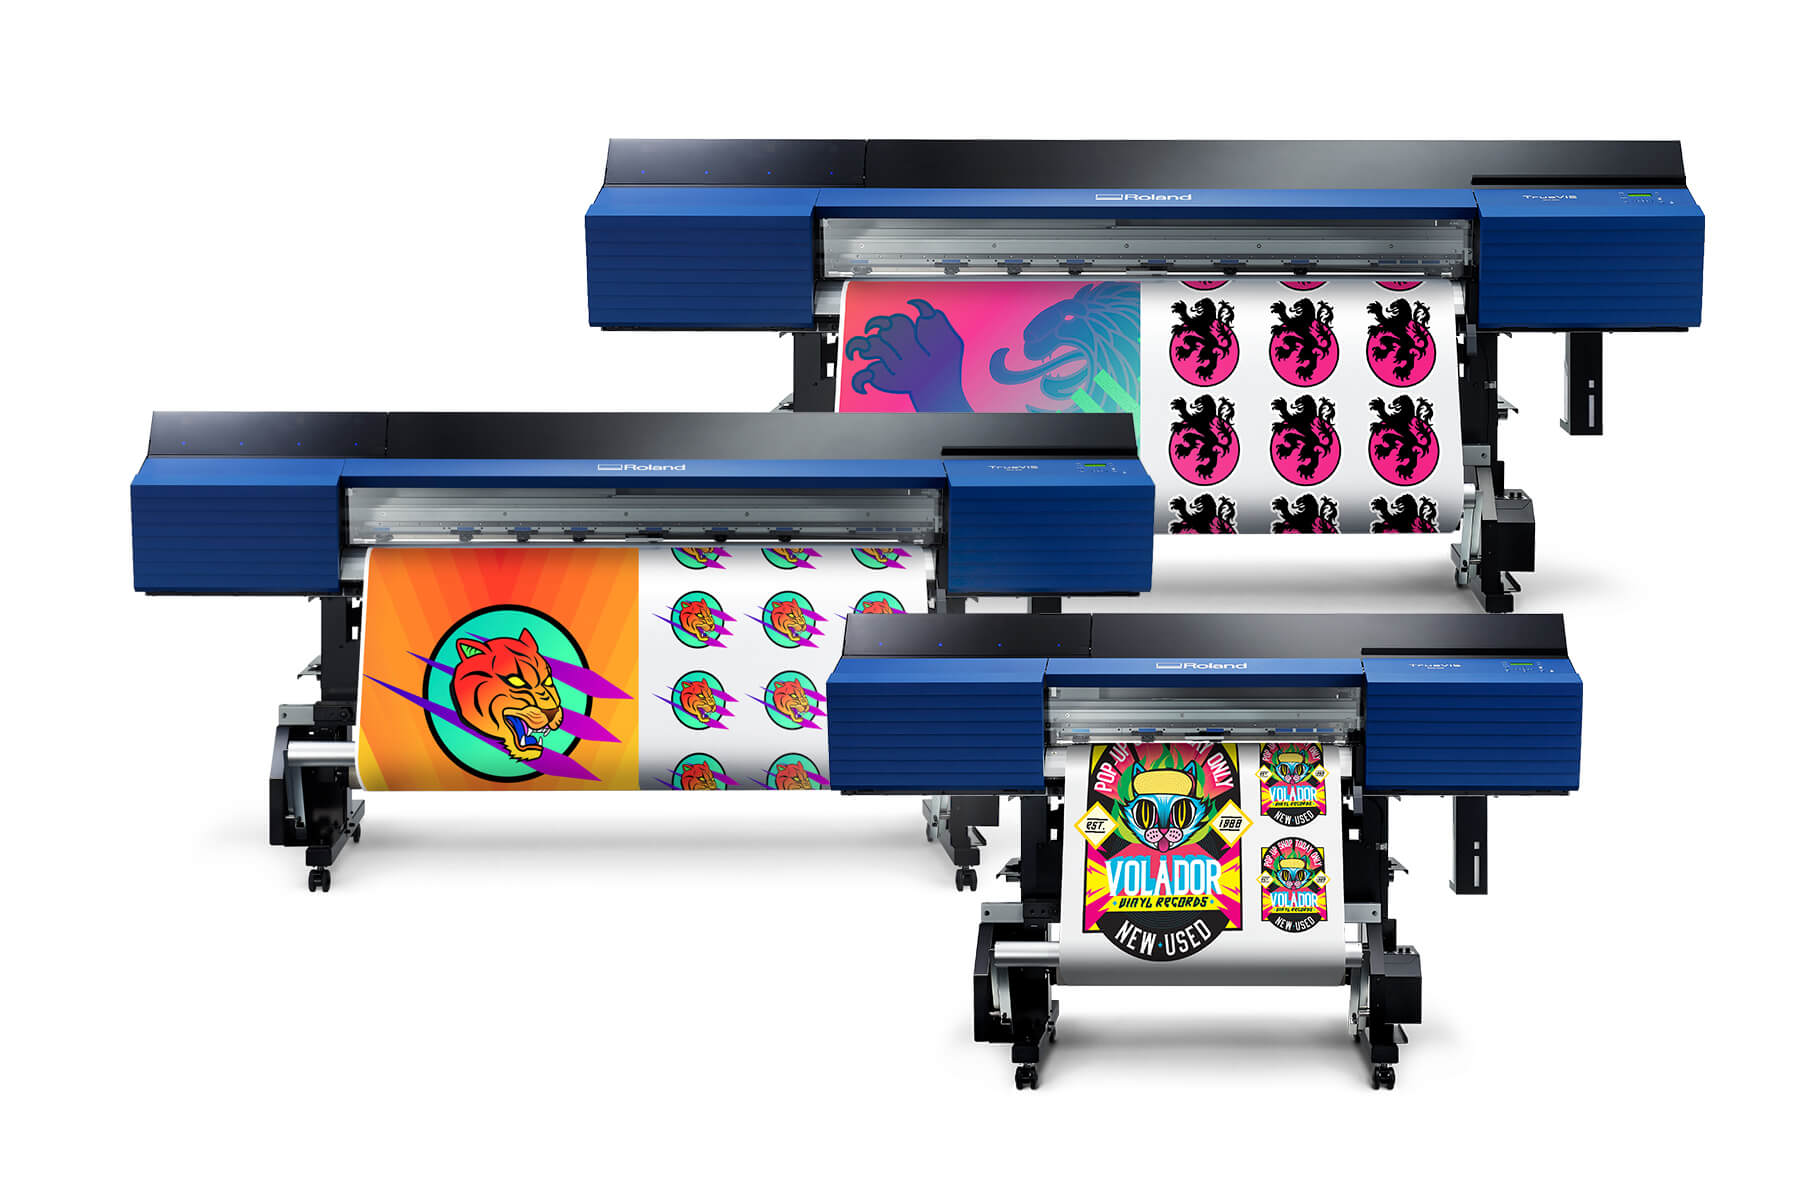  Roland's newly launched TrueVIS SG2 series wide-format printer/cutters